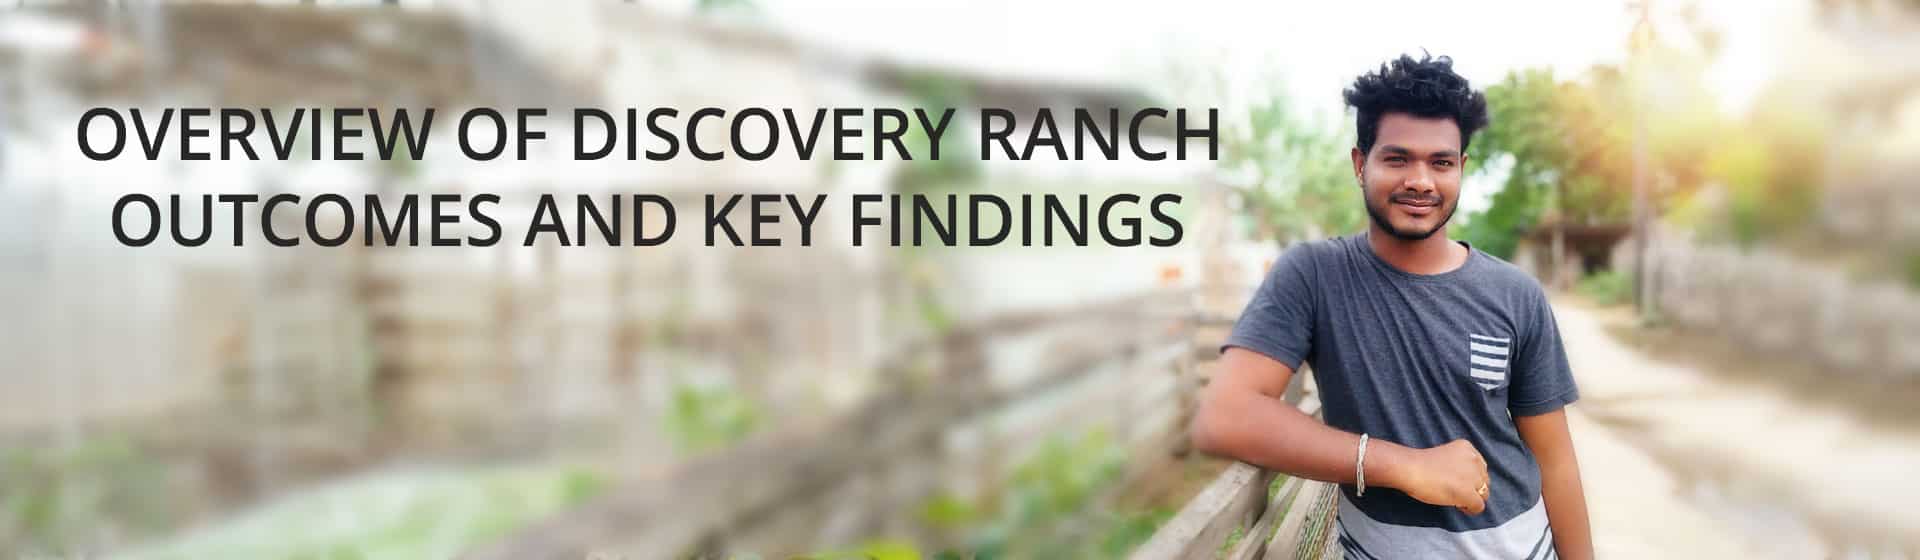 Overview-of-Discovery-Ranch-Outcomes-and-Key-Findings-v2